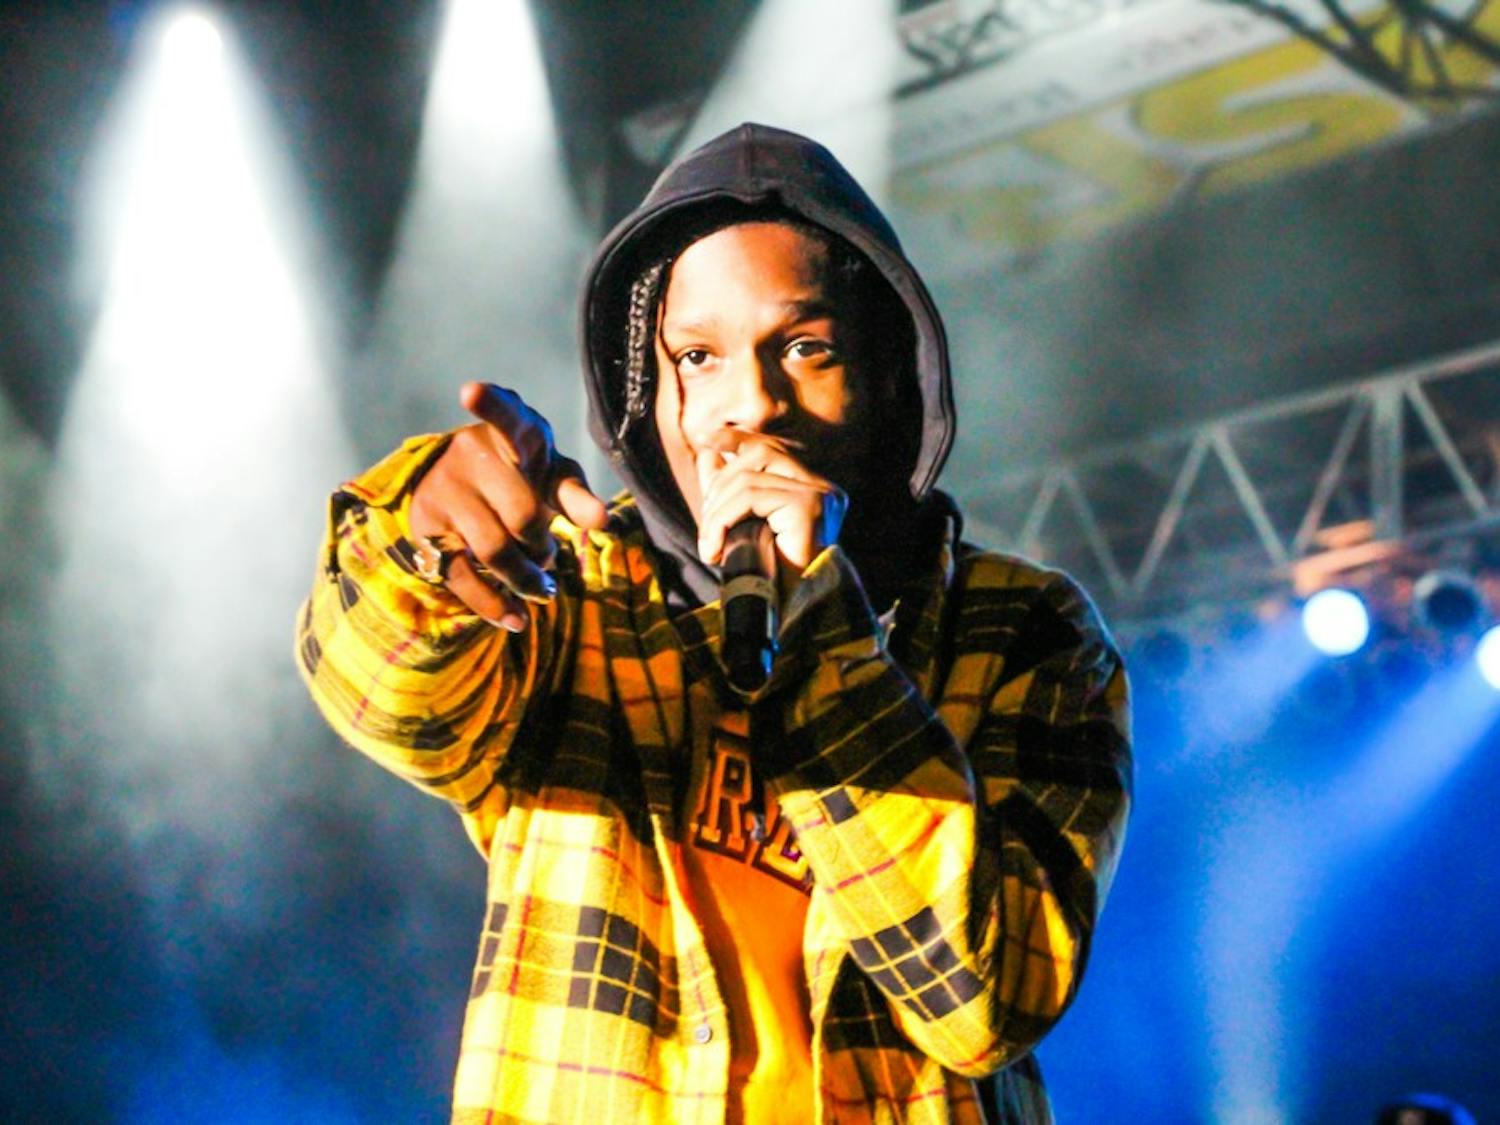 New York rapper A$AP Rocky performs onstage in 2013.
